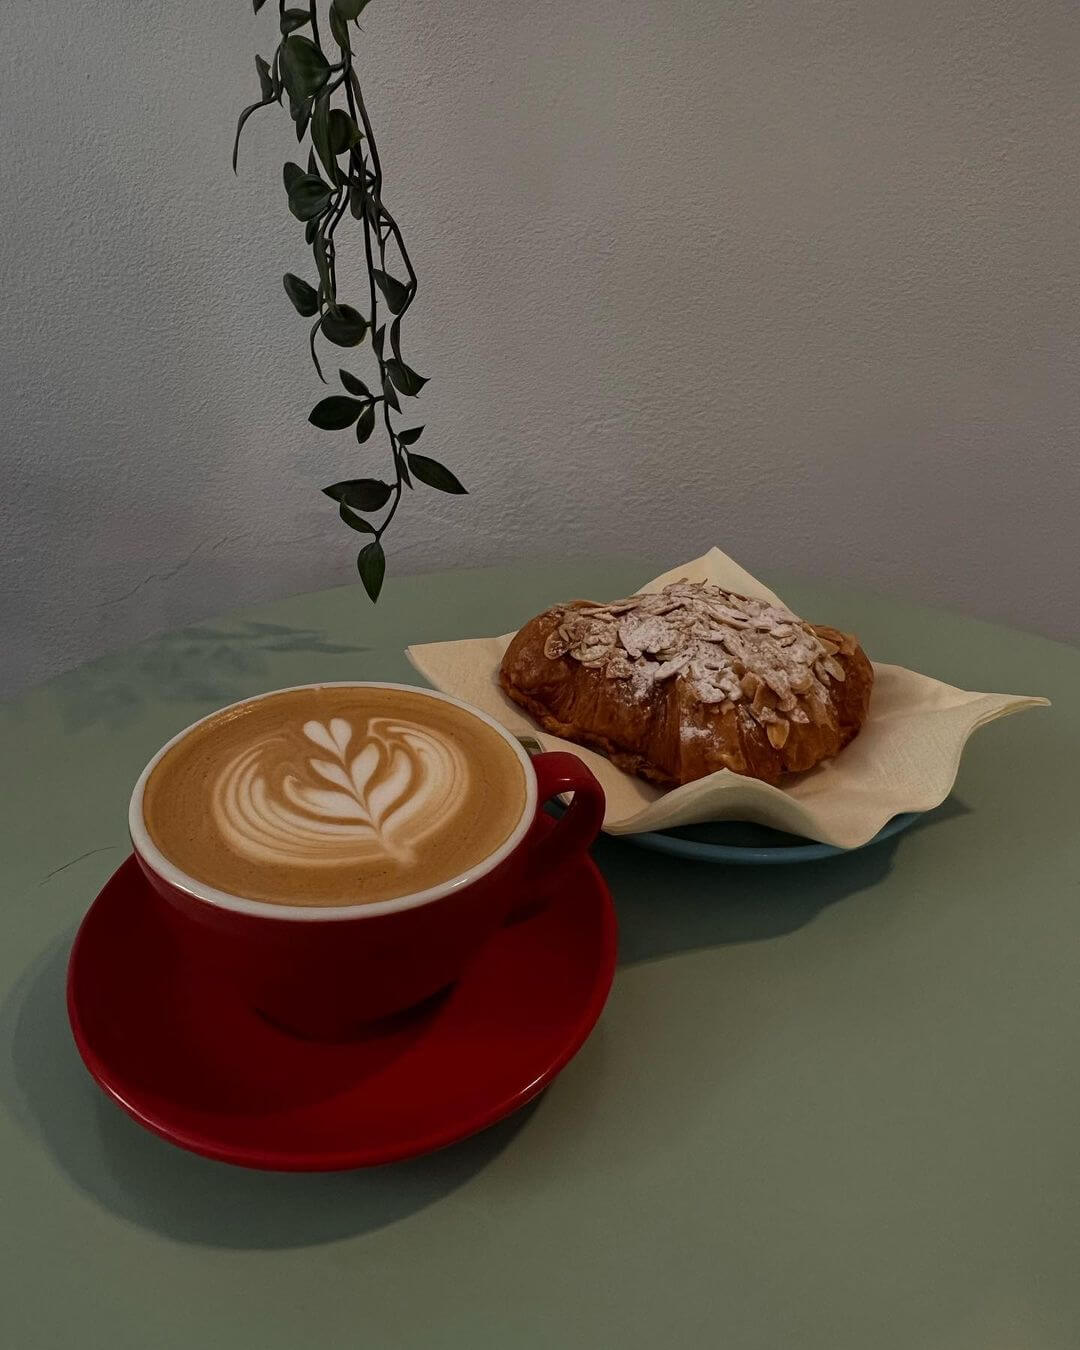 Renaissance Specialty Coffee pastry and coffee